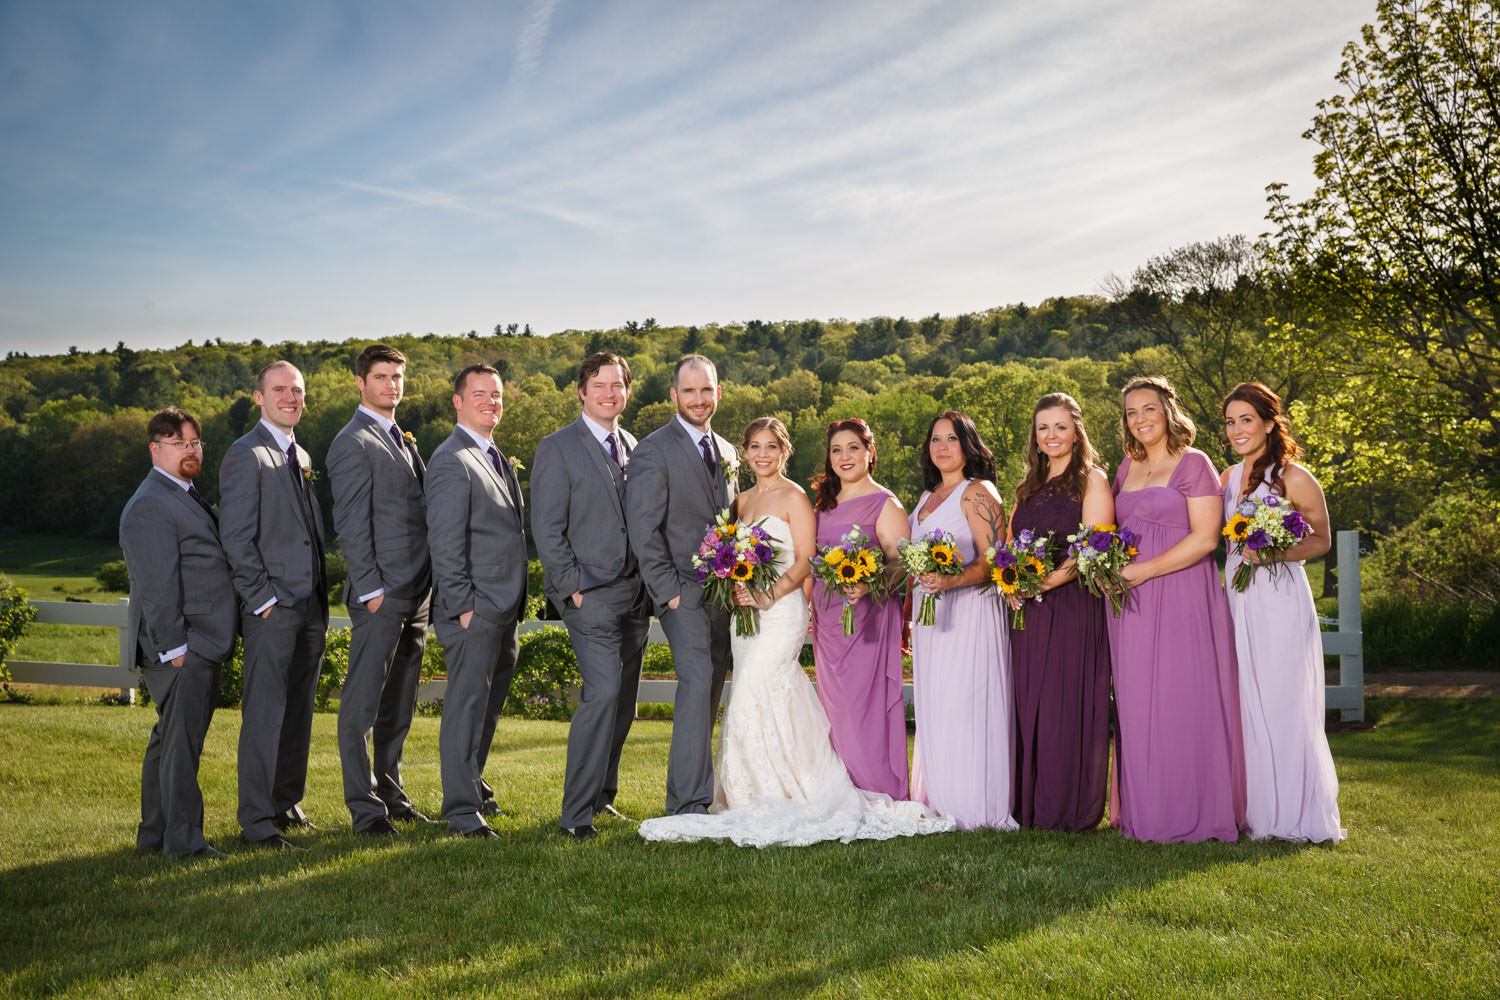 Wedding party photo, outside with rolling hills in the background